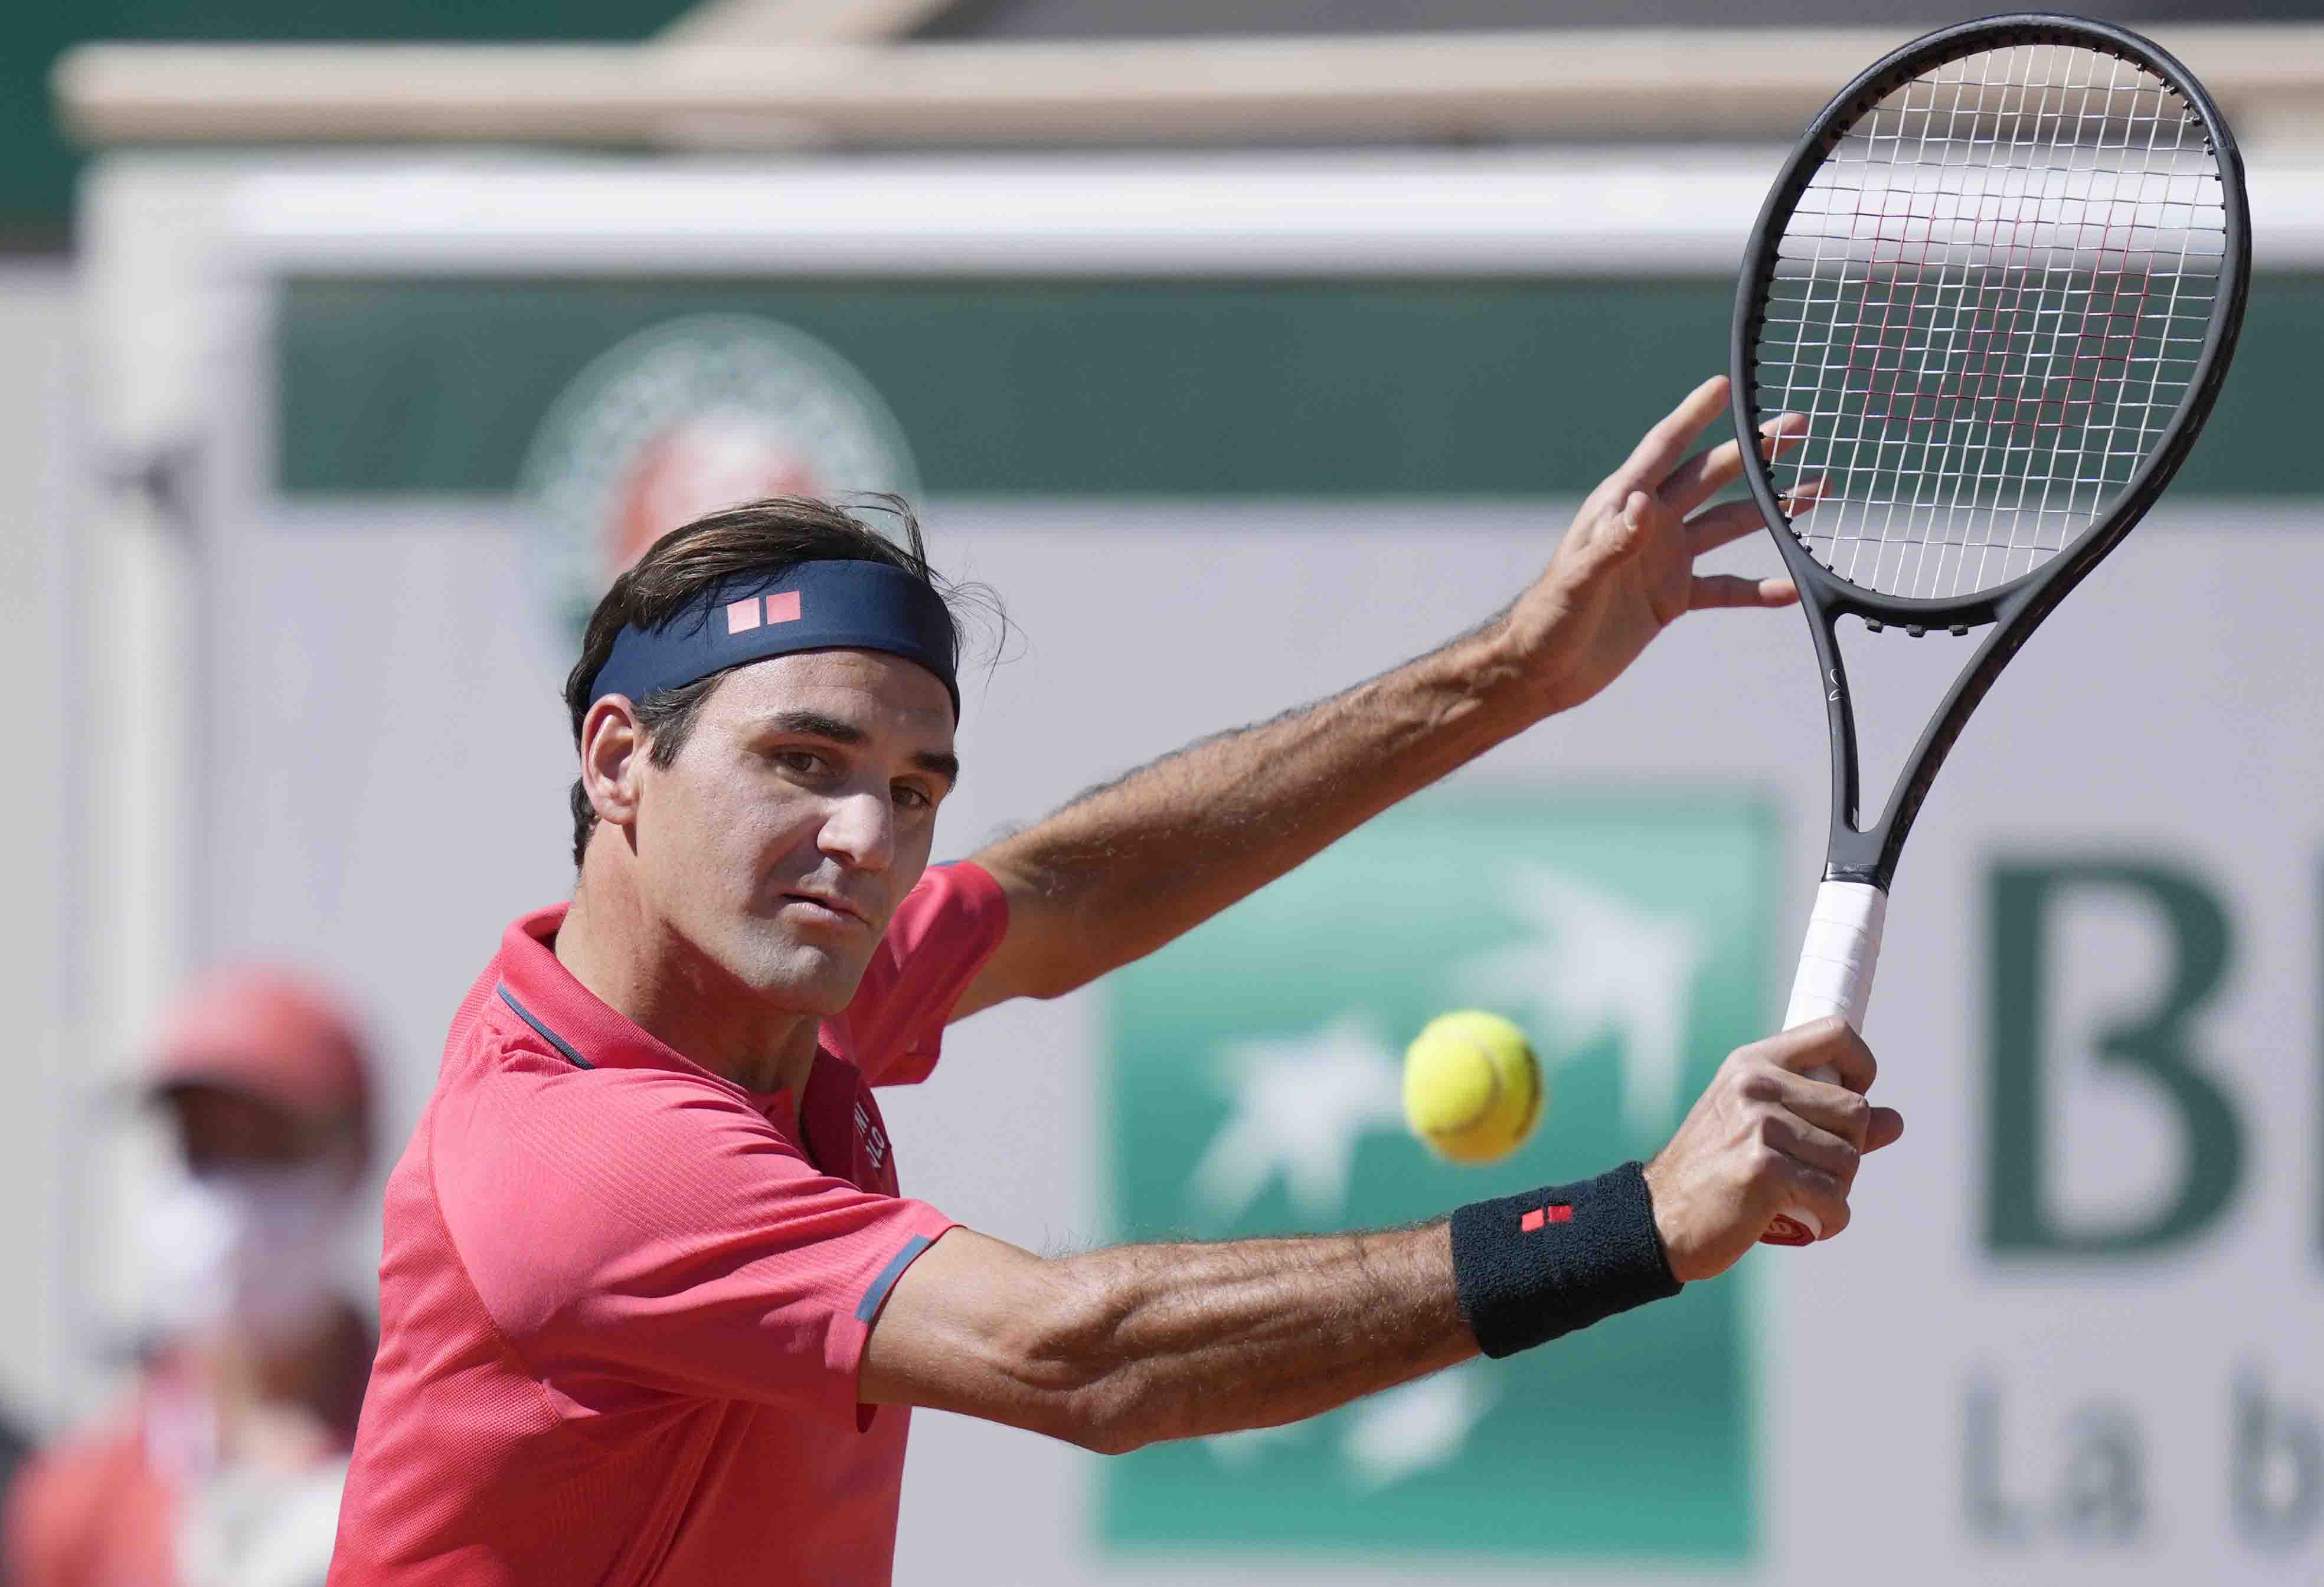 Roger Federer chooses rest, withdraws from French Open